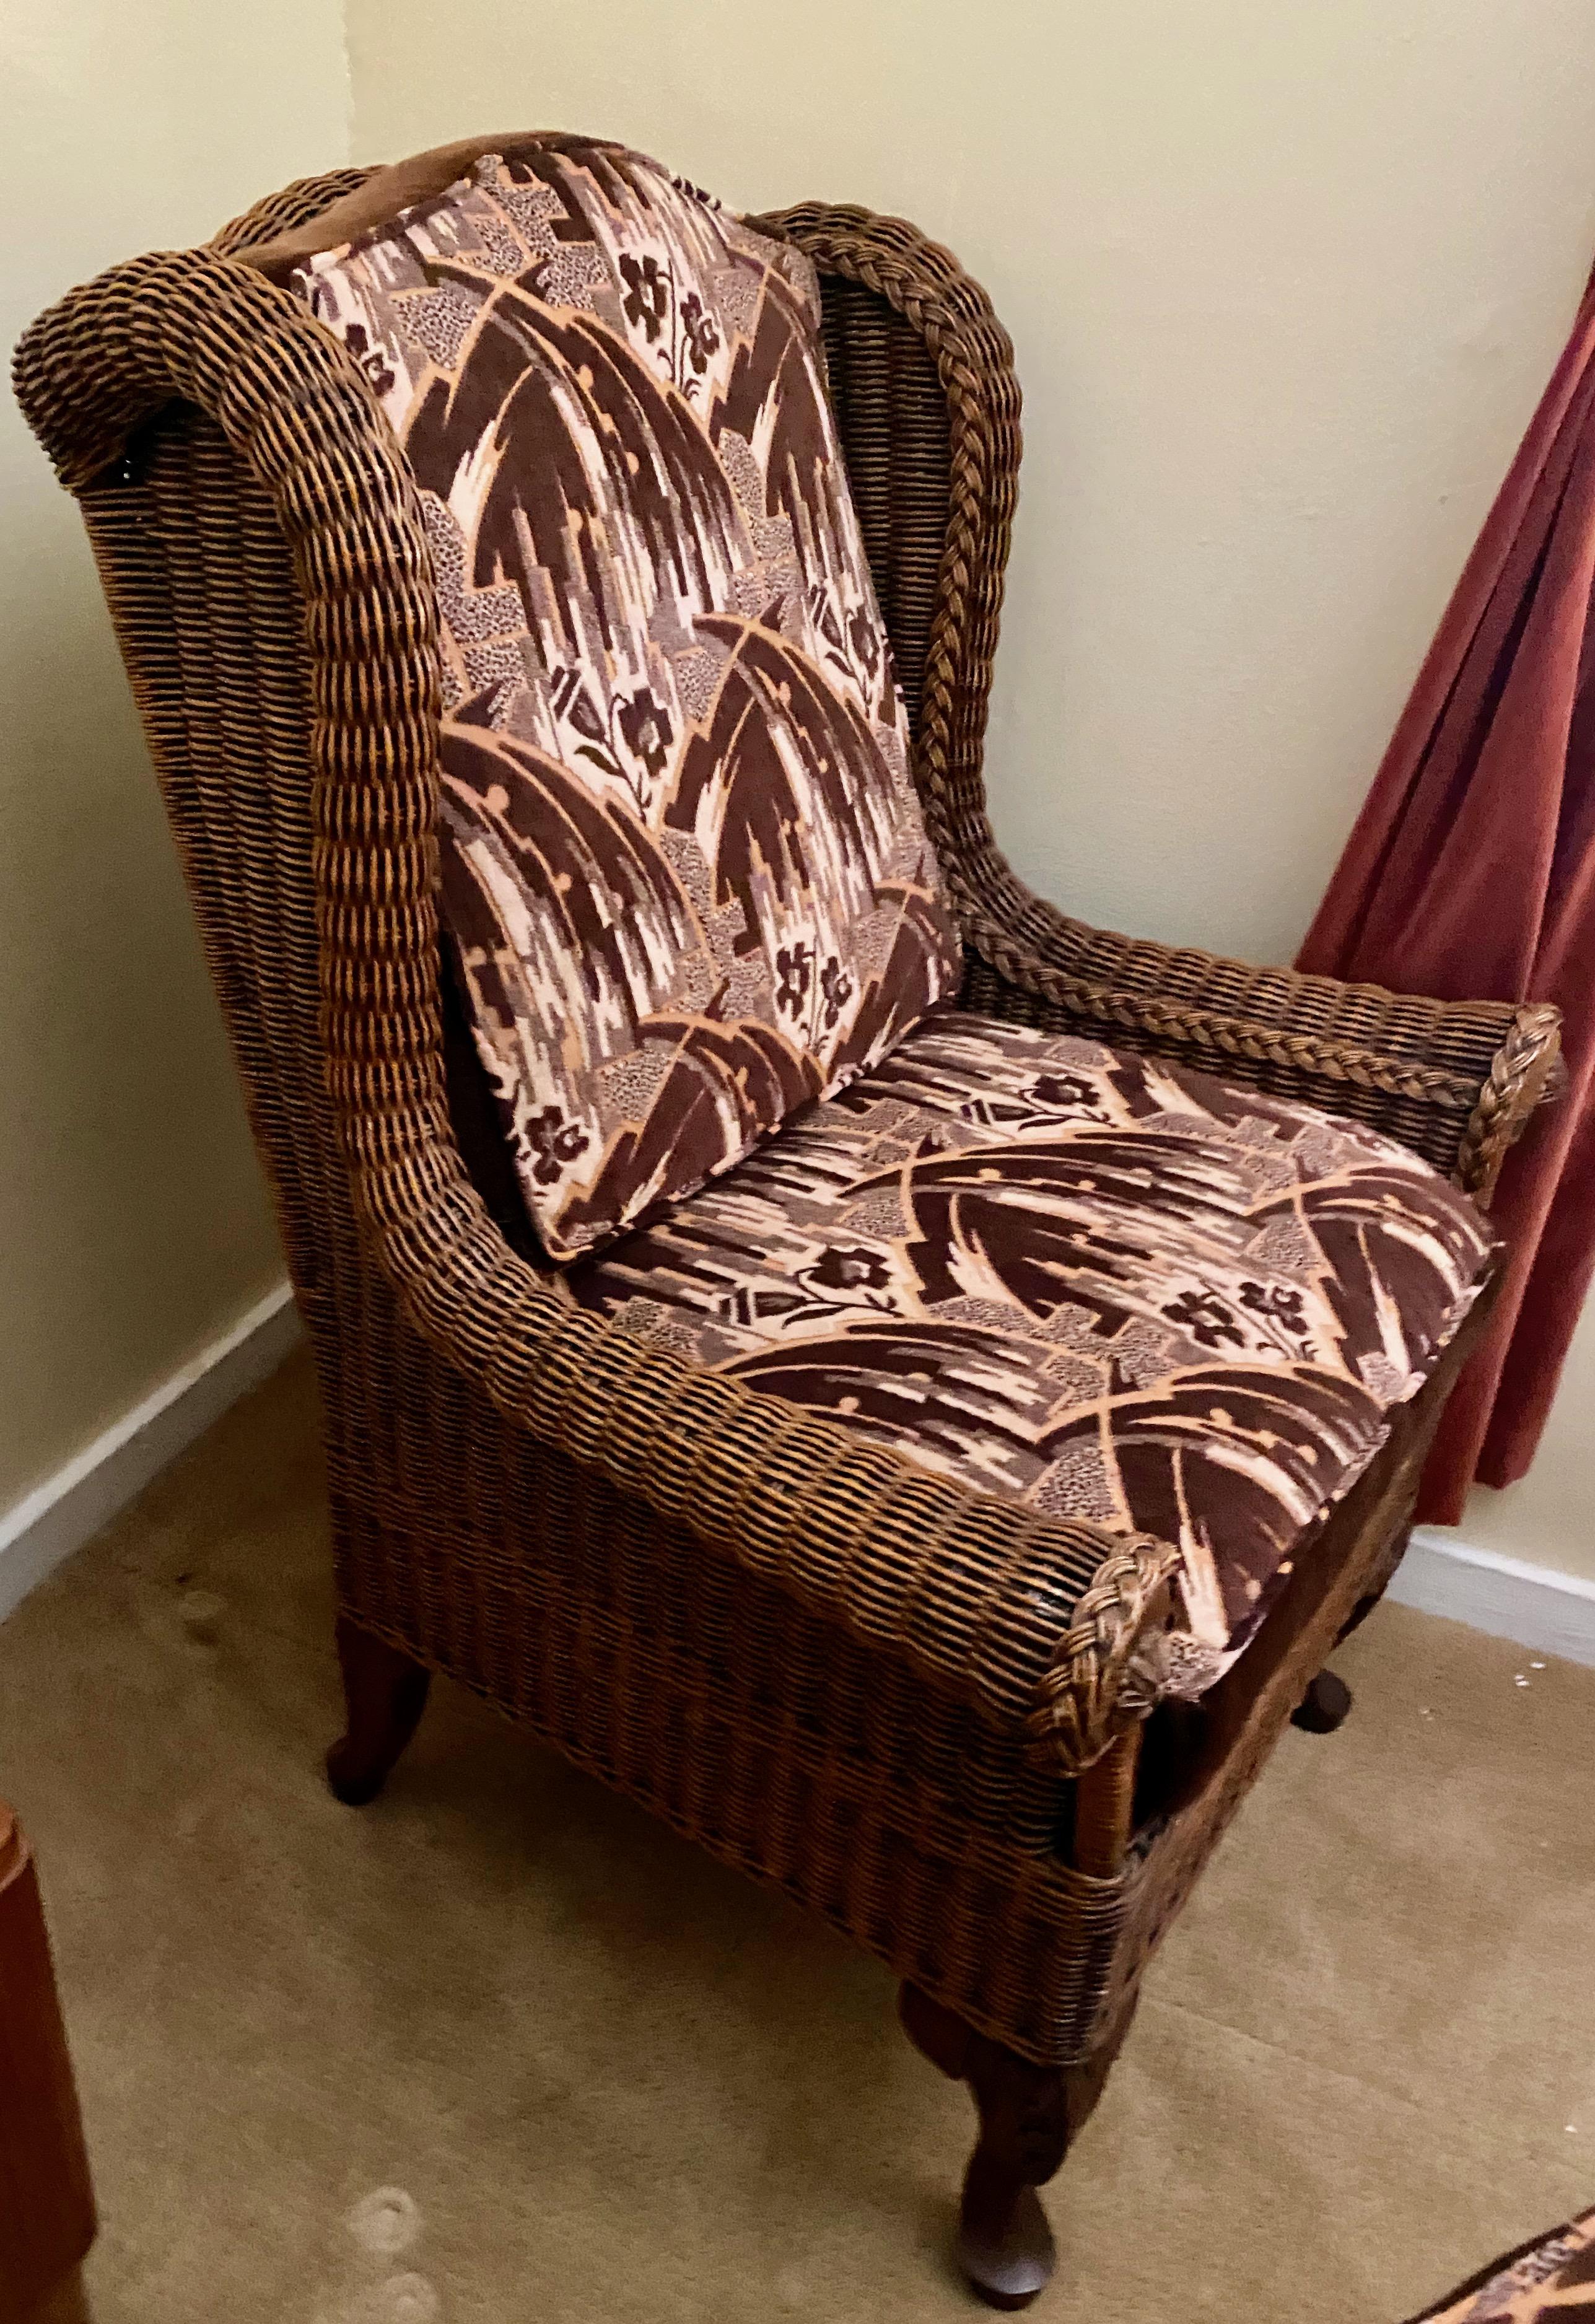 Wicker High Back Art Deco Chair and Stool with Original Fabric For Sale 3